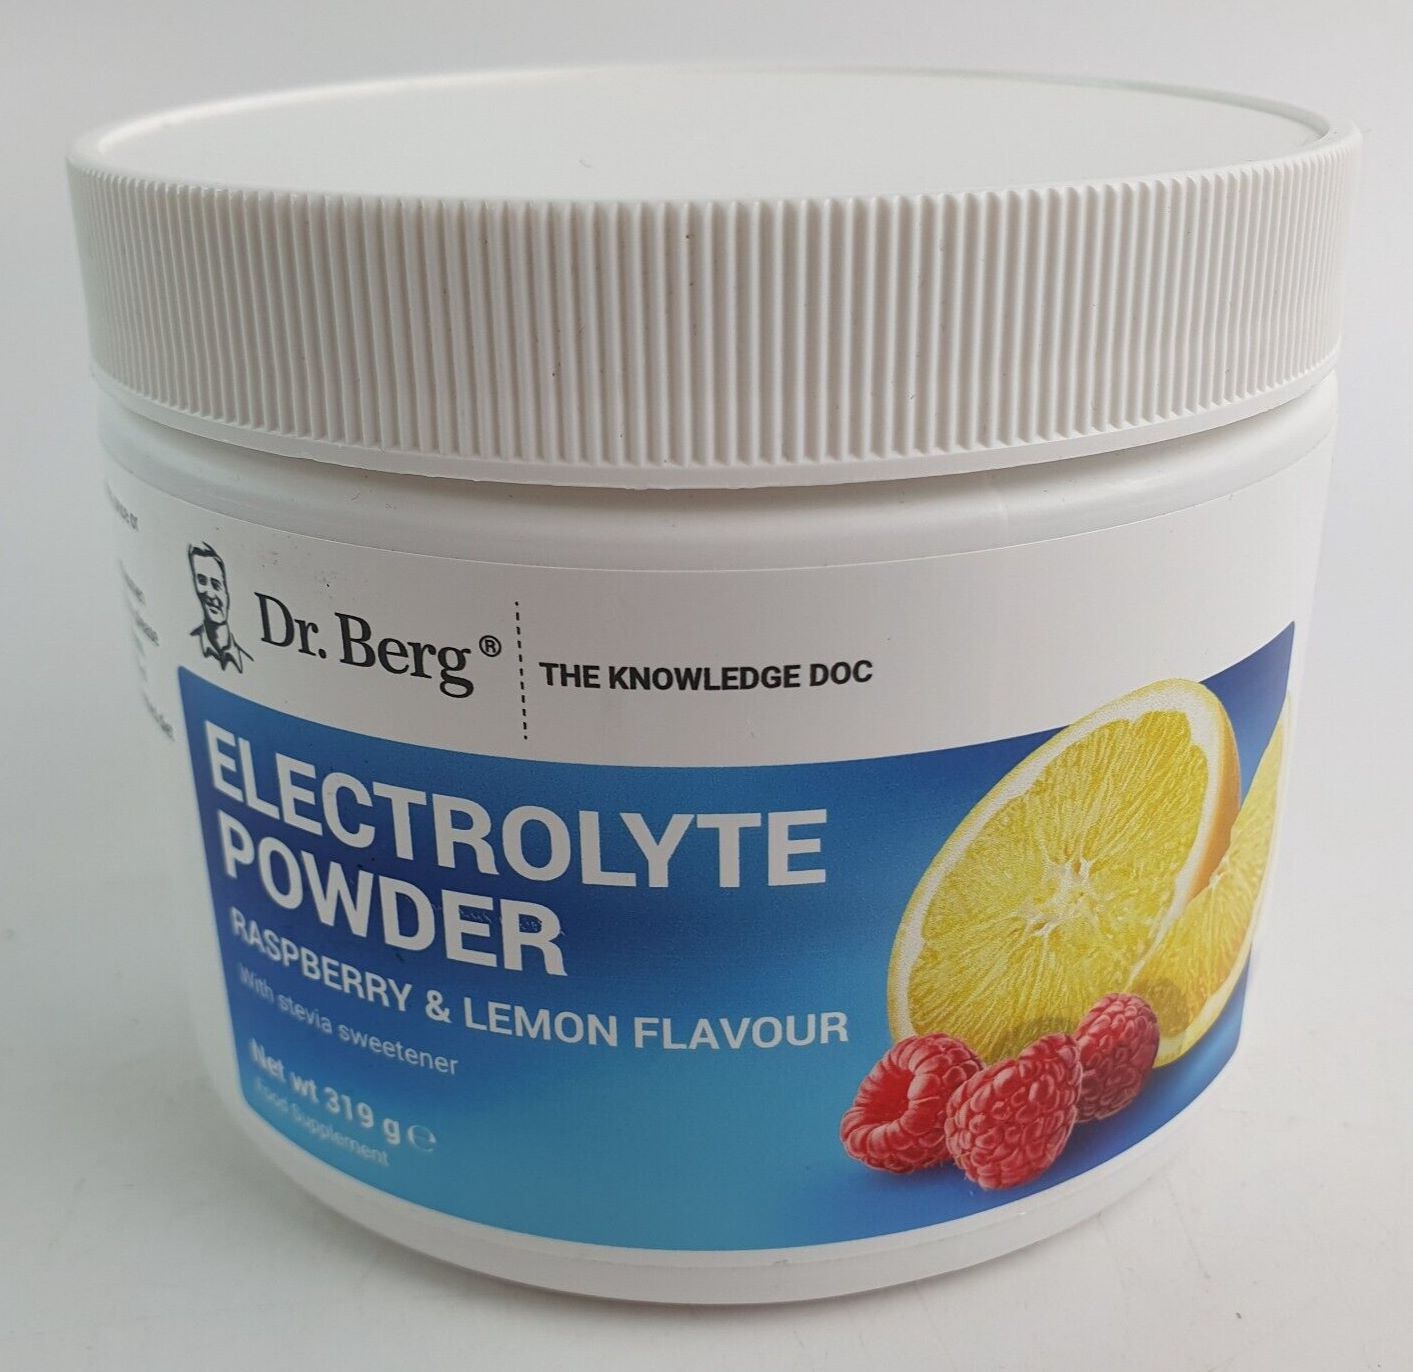 20-dr-berg-electrolyte-powder-nutrition-facts